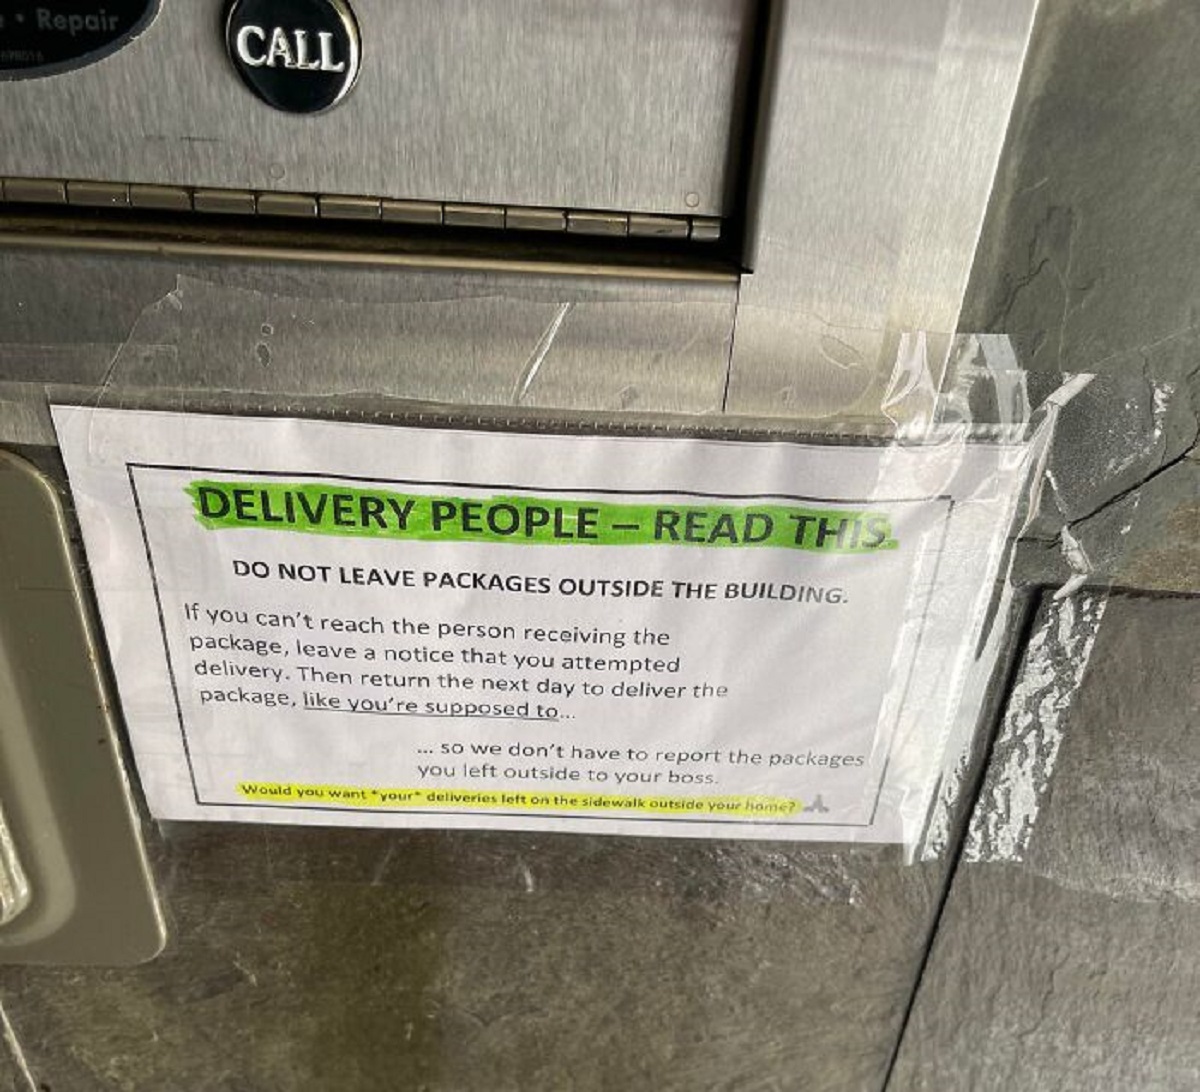 architecture - Repair Call 178016 Delivery PeopleRead This Do Not Leave Packages Outside The Building. If you can't reach the person receiving the package, leave a notice that you attempted delivery. Then return the next day to deliver the package, you're